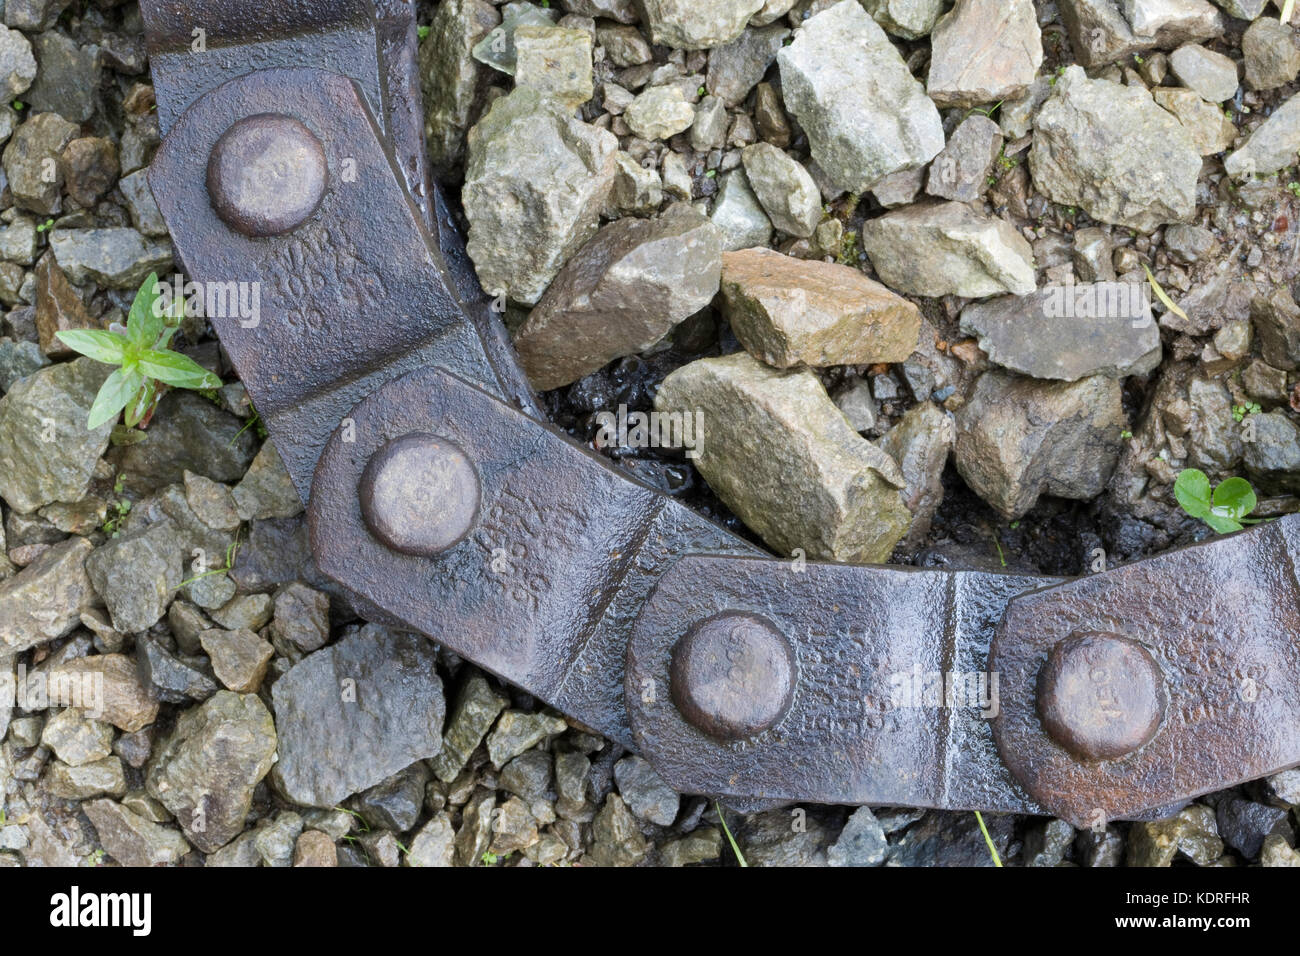 Chain on ground with gravel and weed Stock Photo